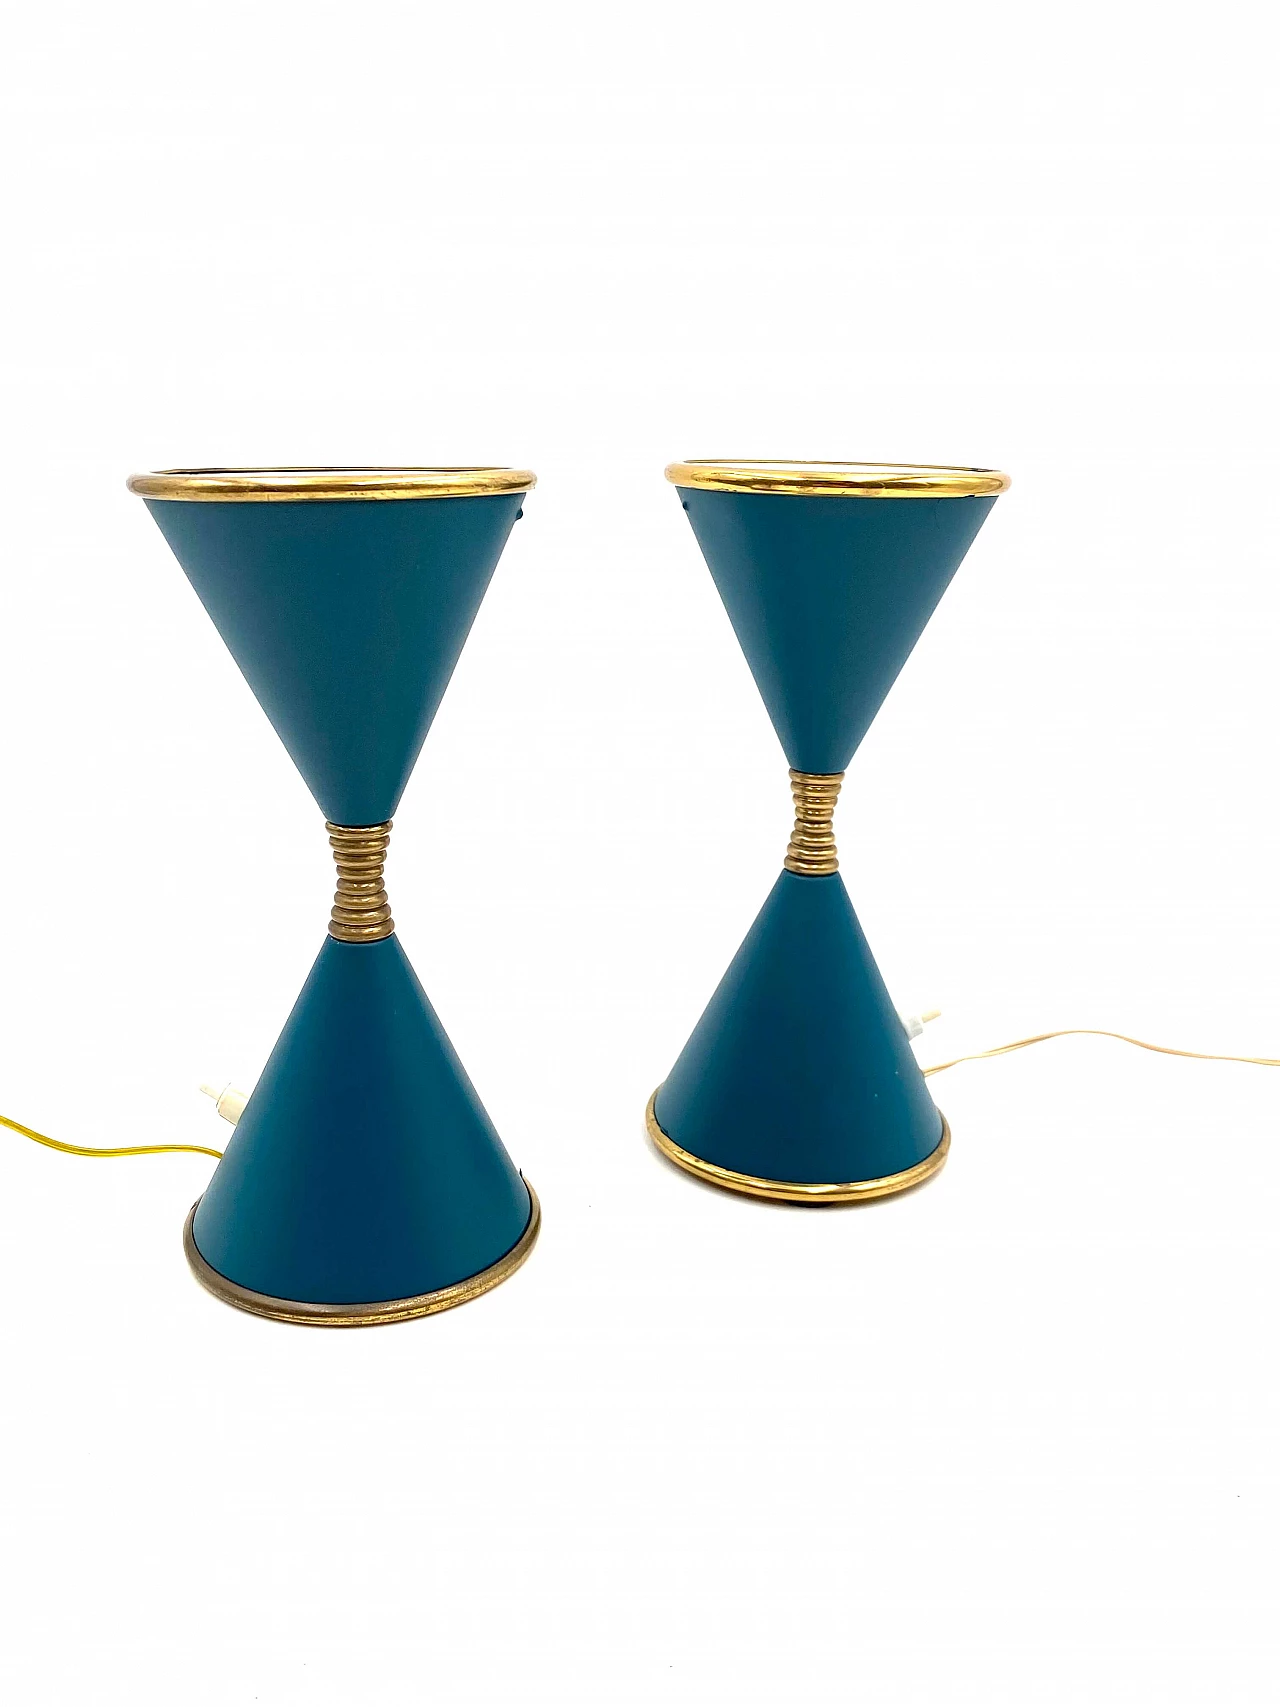 Pair of Clessidra lamps by Angelo Lelii for Arredoluce, 1960s 1201465